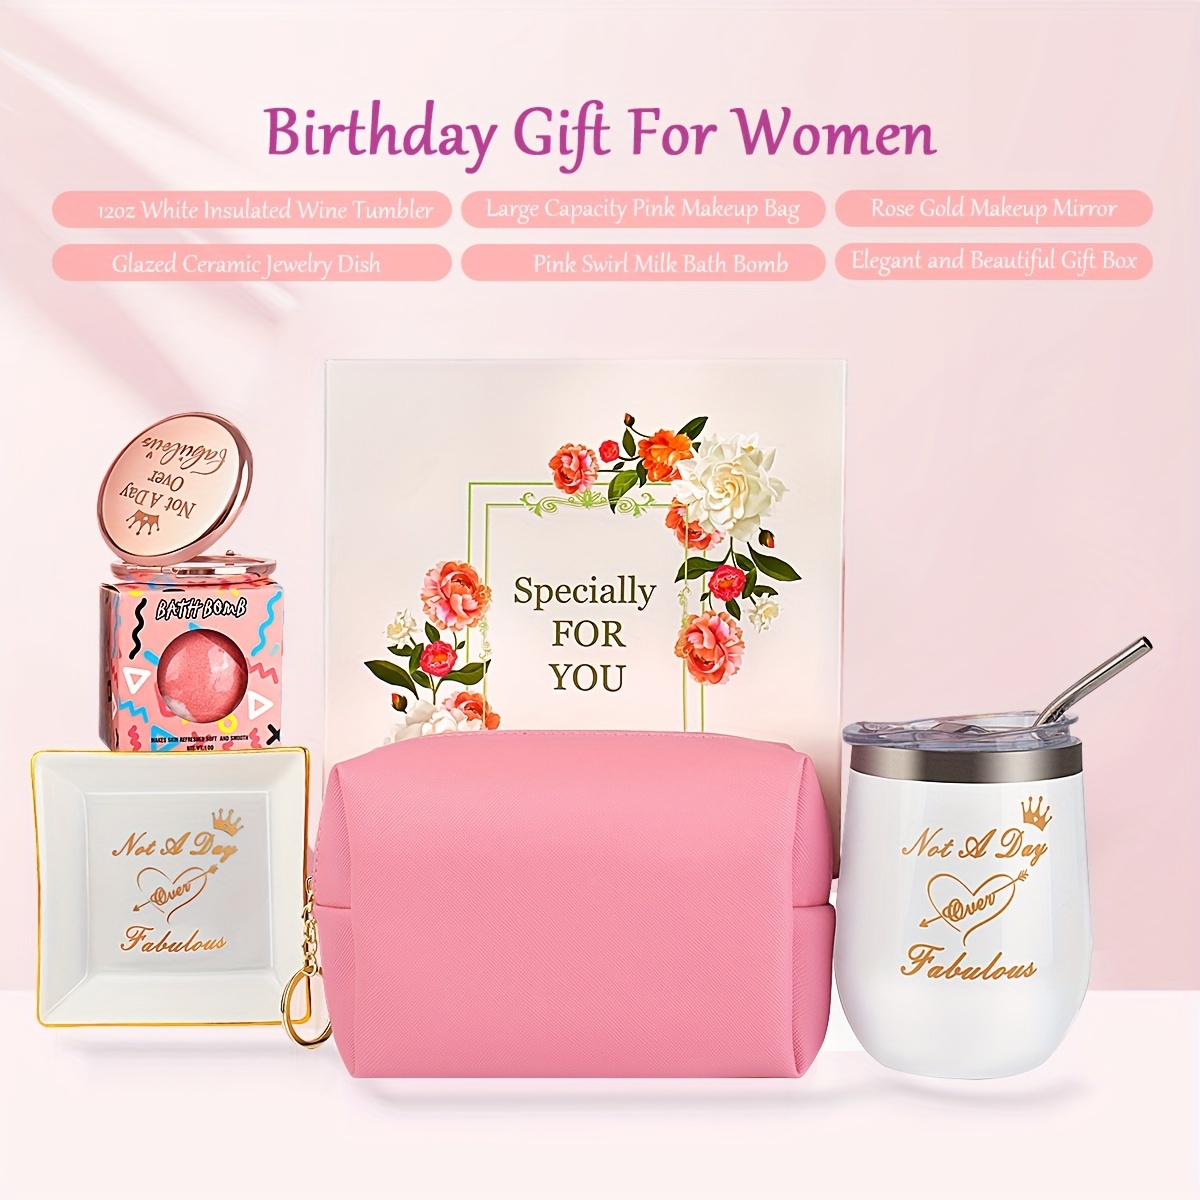 Luxury Gift Set Spa Box for Women Happy Birthday Gifts Basket Gift Ideas  Relaxing Pamper Gifts for Best Friend Sister Her Wife Mom Mother Grandma  Bday